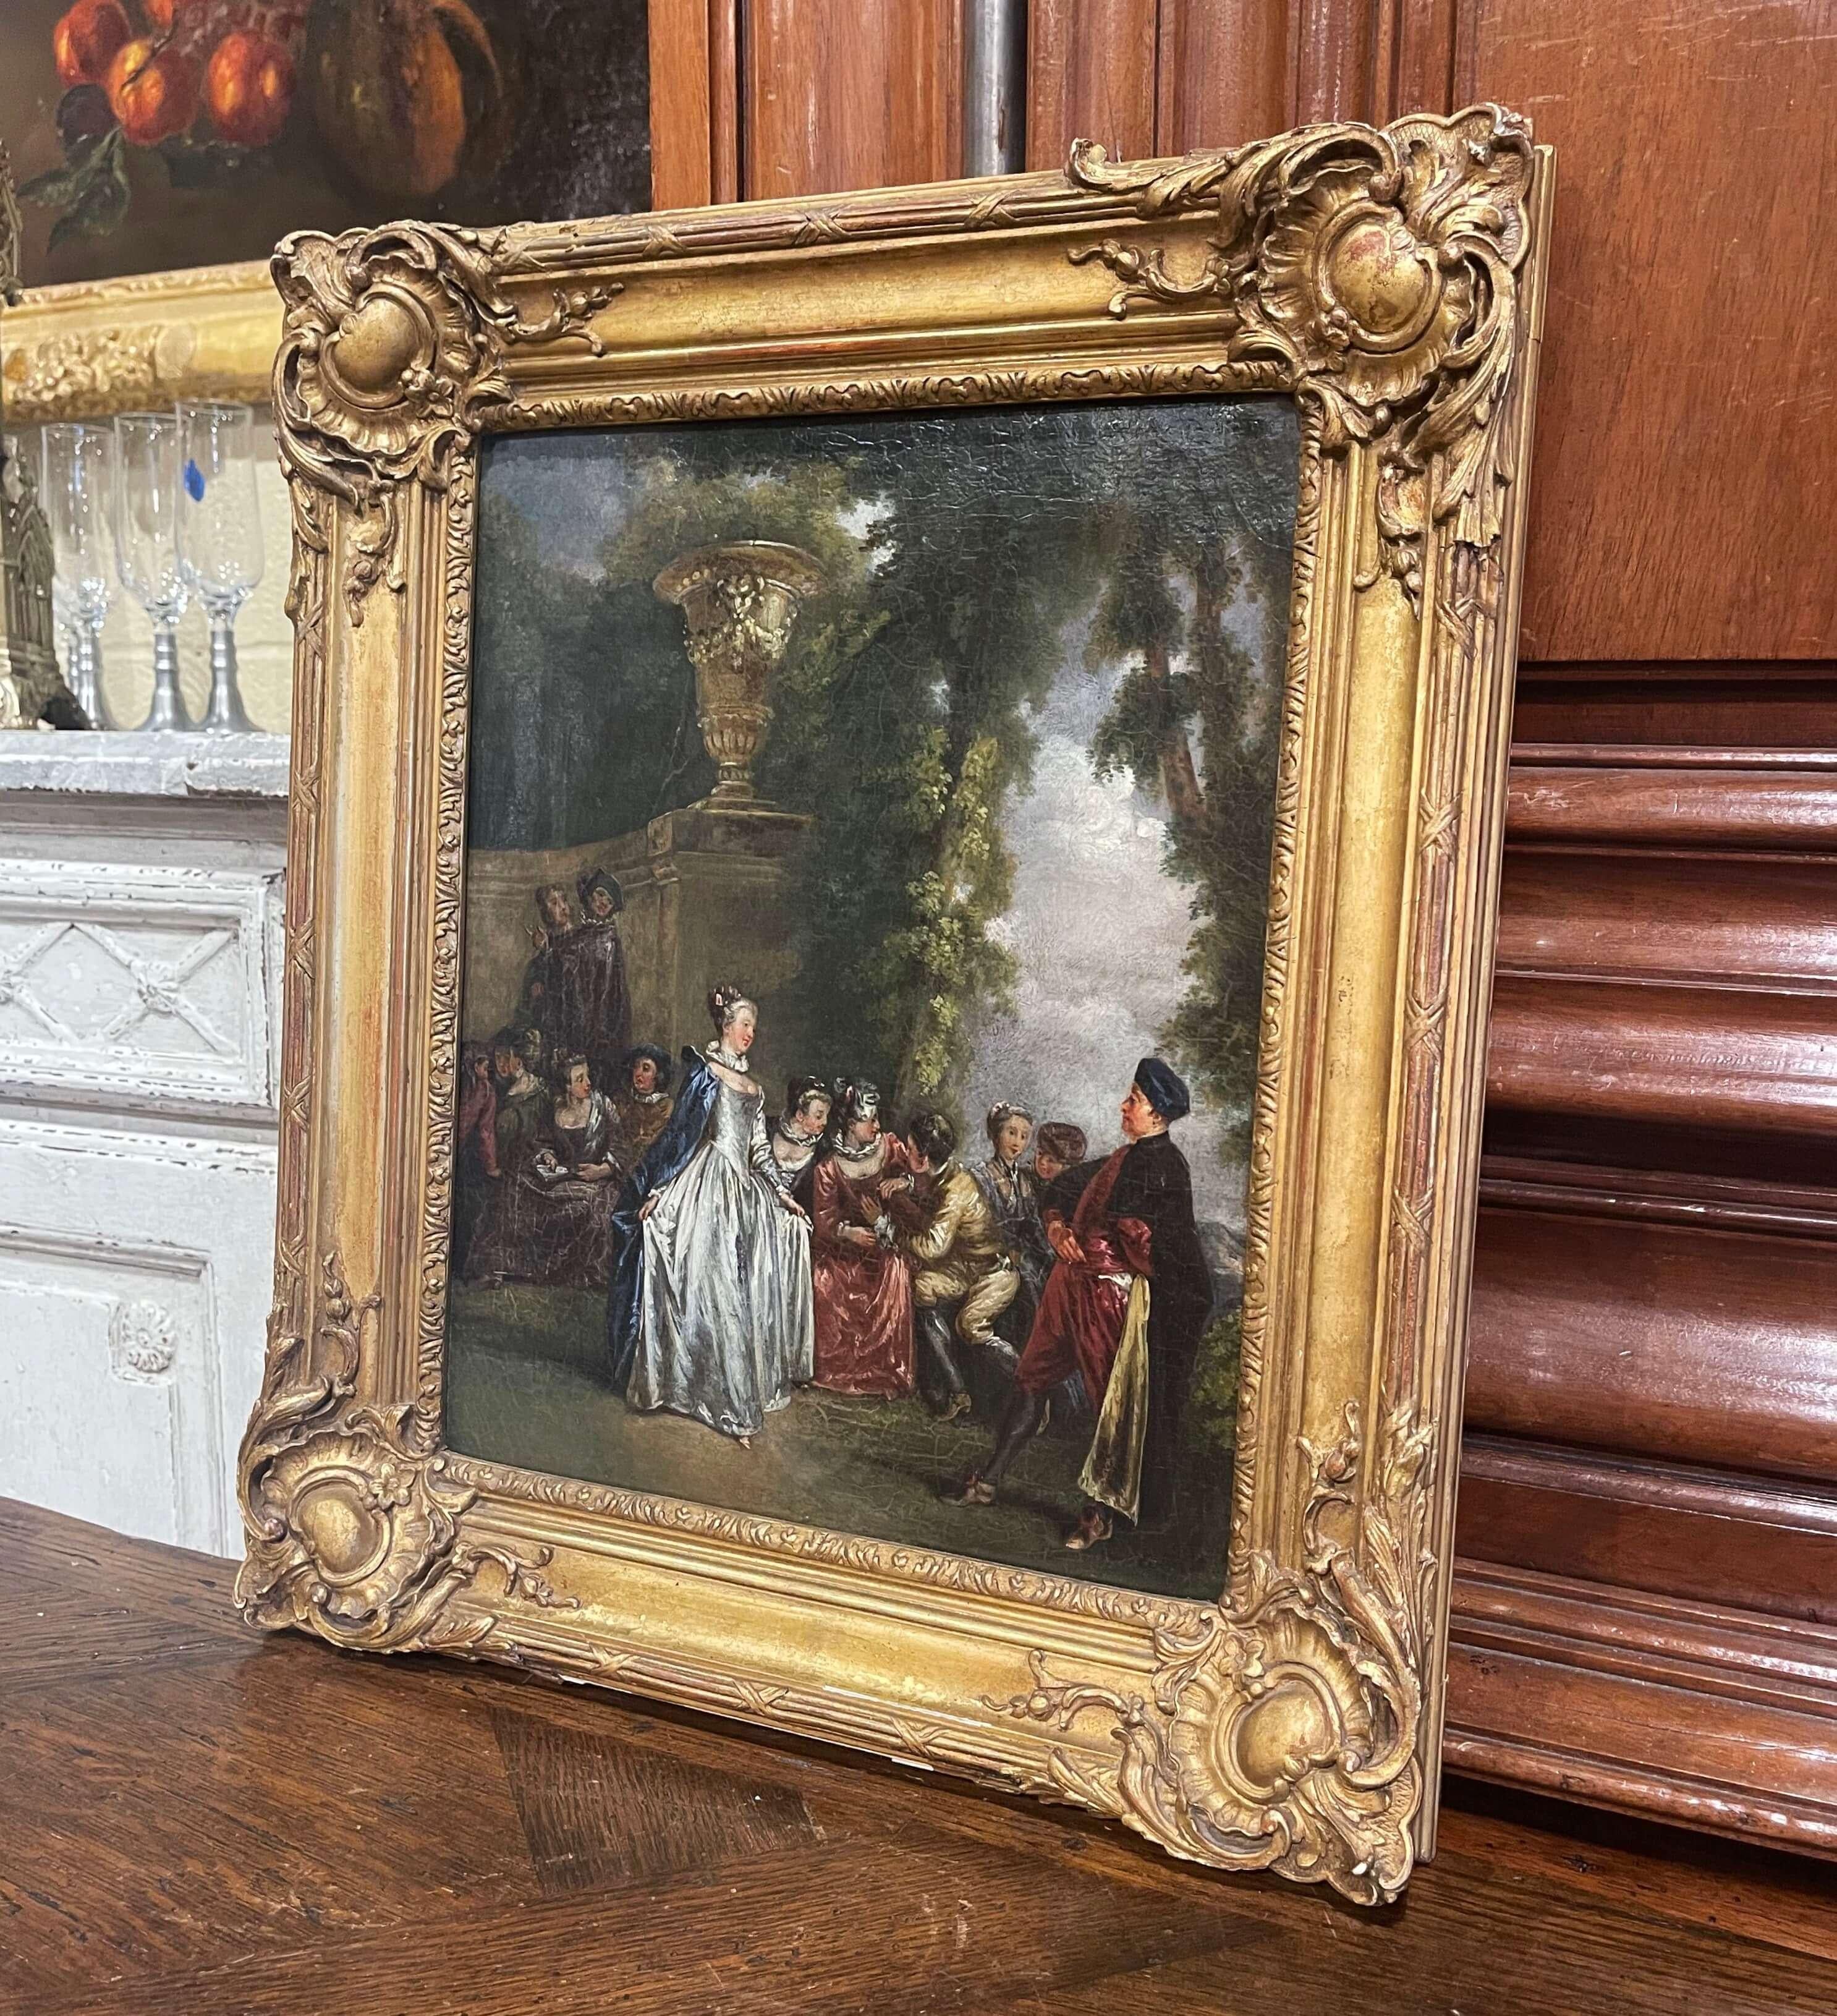 Created in France circa 1780 and set in the original carved gilt frame, the canvas depicts an outdoor presentation with a young woman in formal evening dress being presented to a sultan. The scene appears to be taking place in a park in front of an